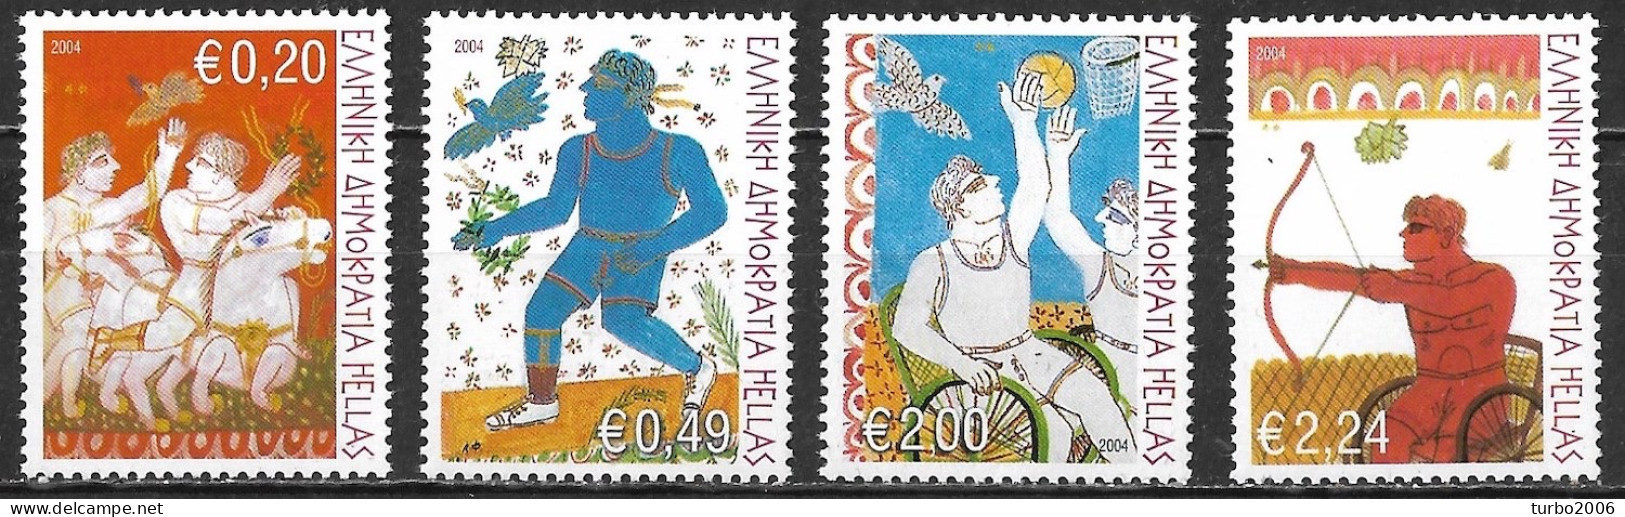 GREECE 2004 The Power Of Will Complete MNH Set Vl. 2249 / 2252 - Nuovi